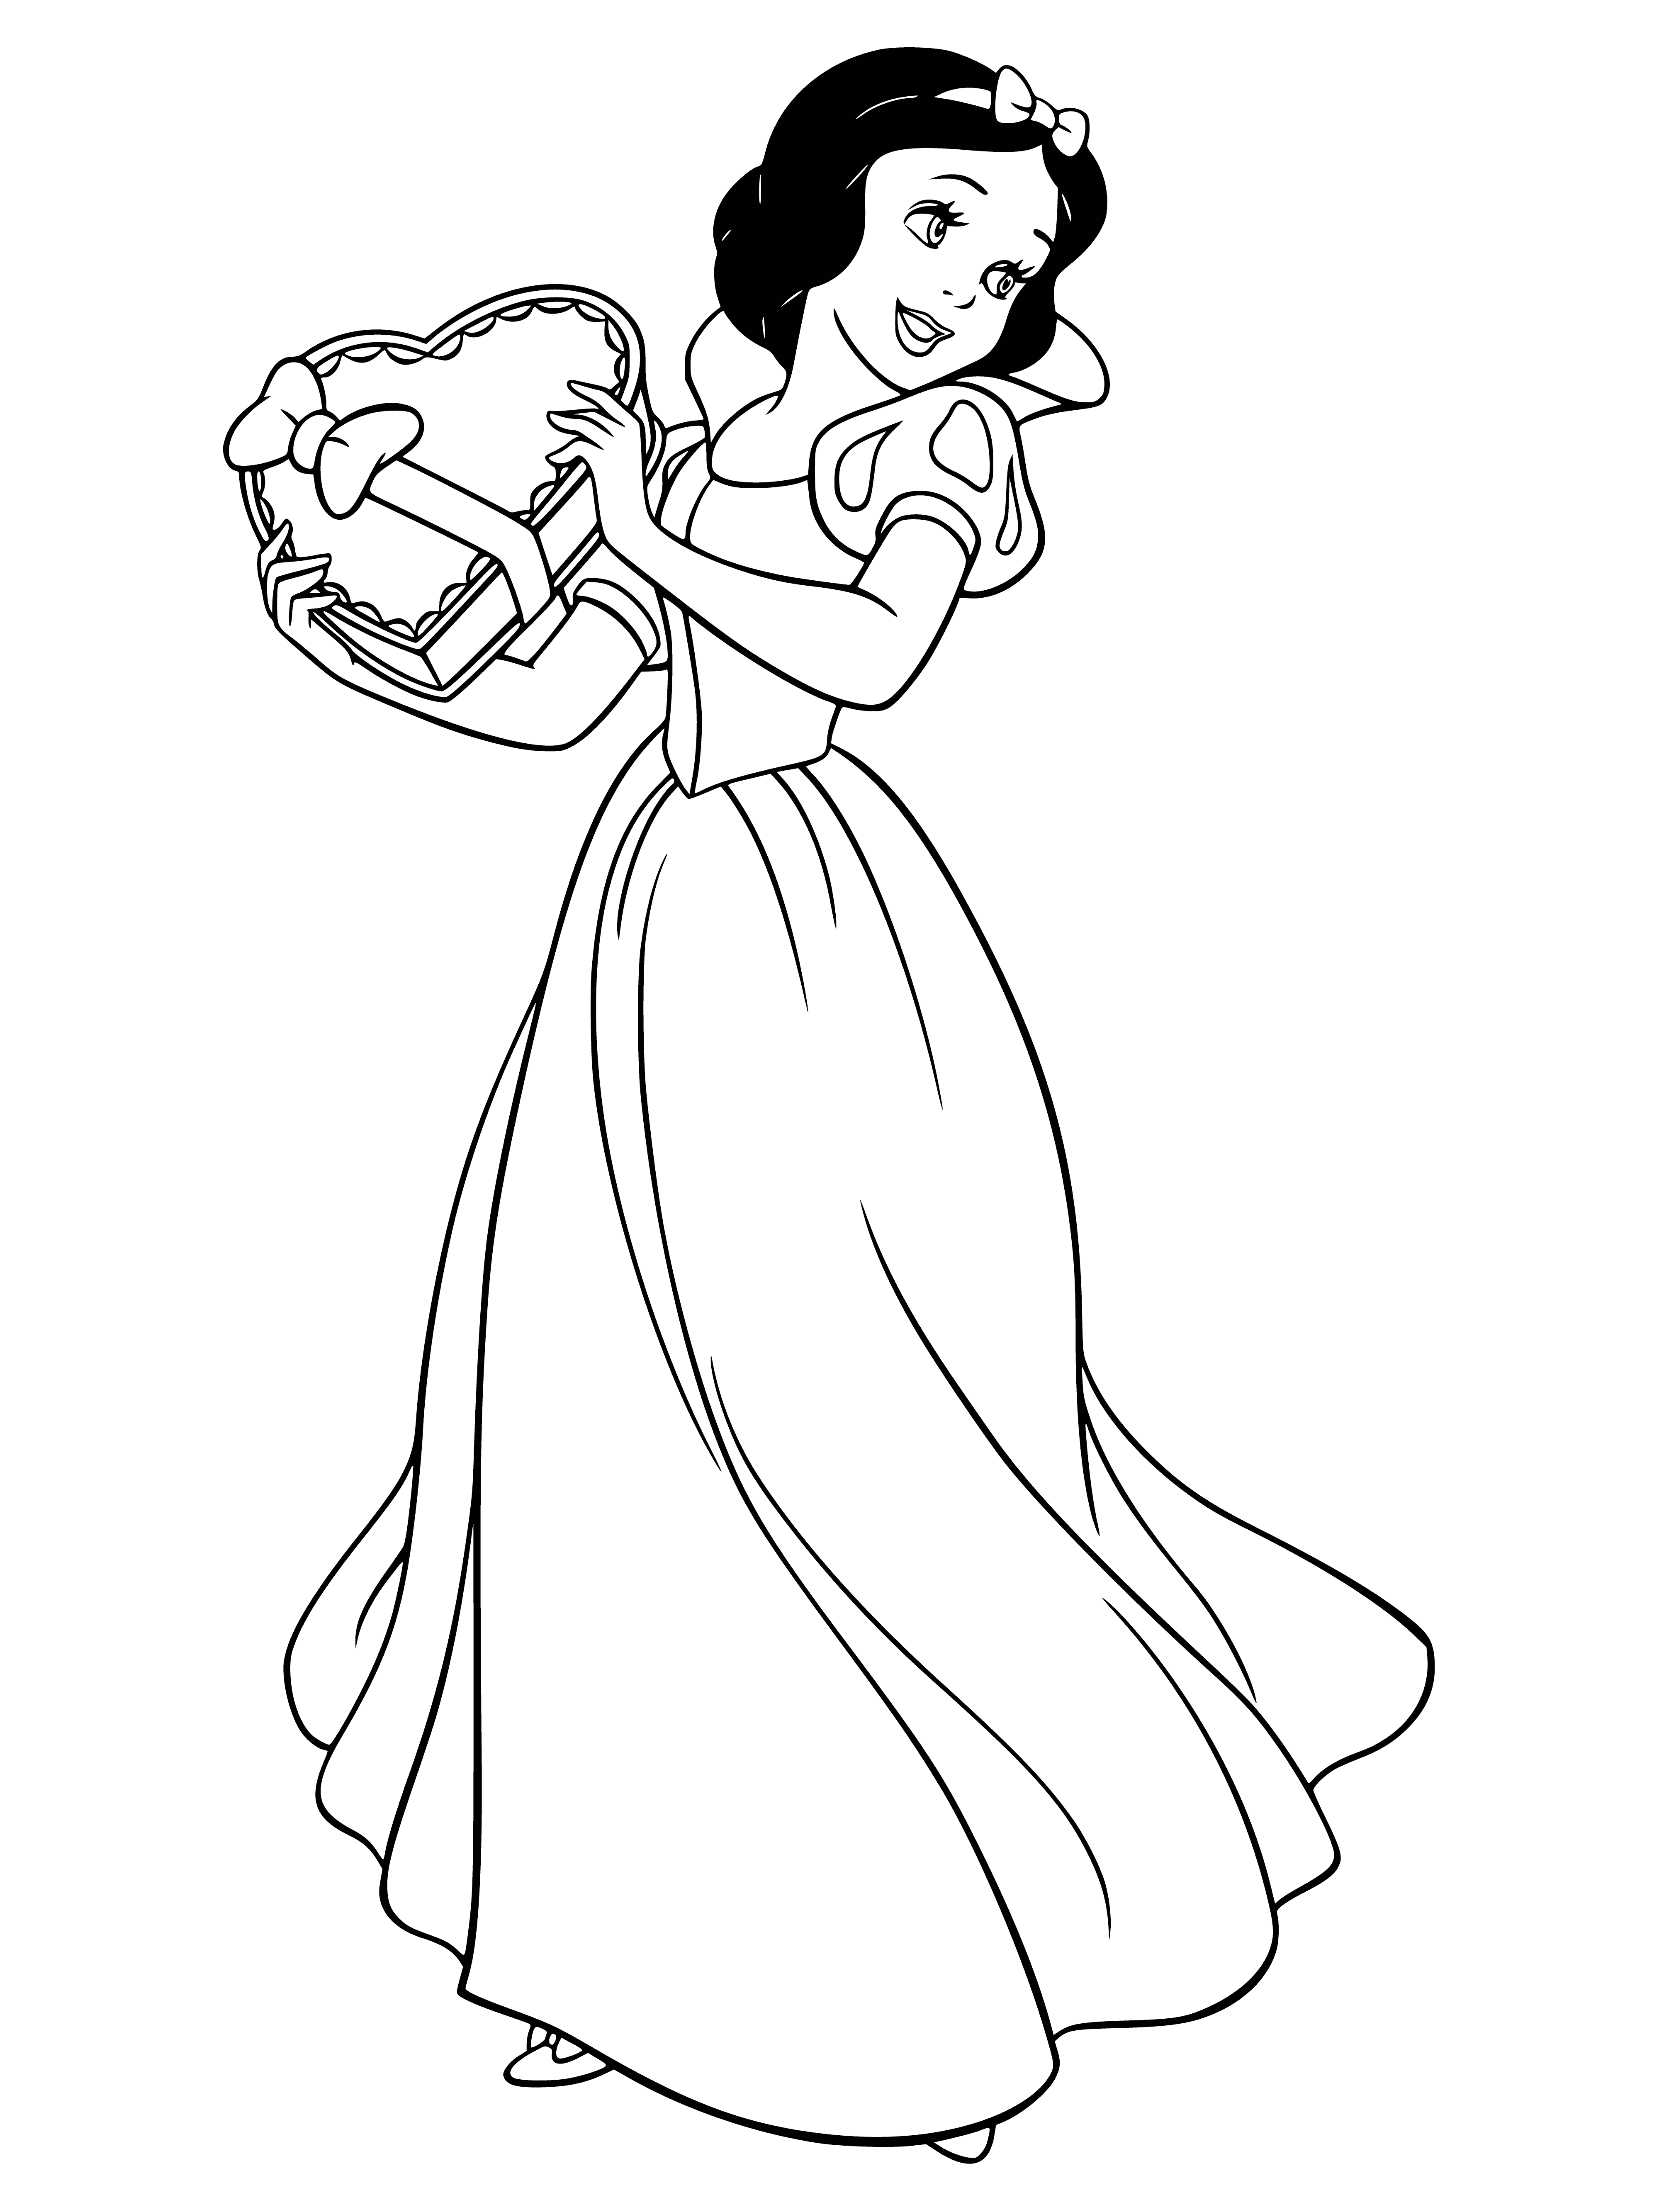 Snow white with a gift coloring page